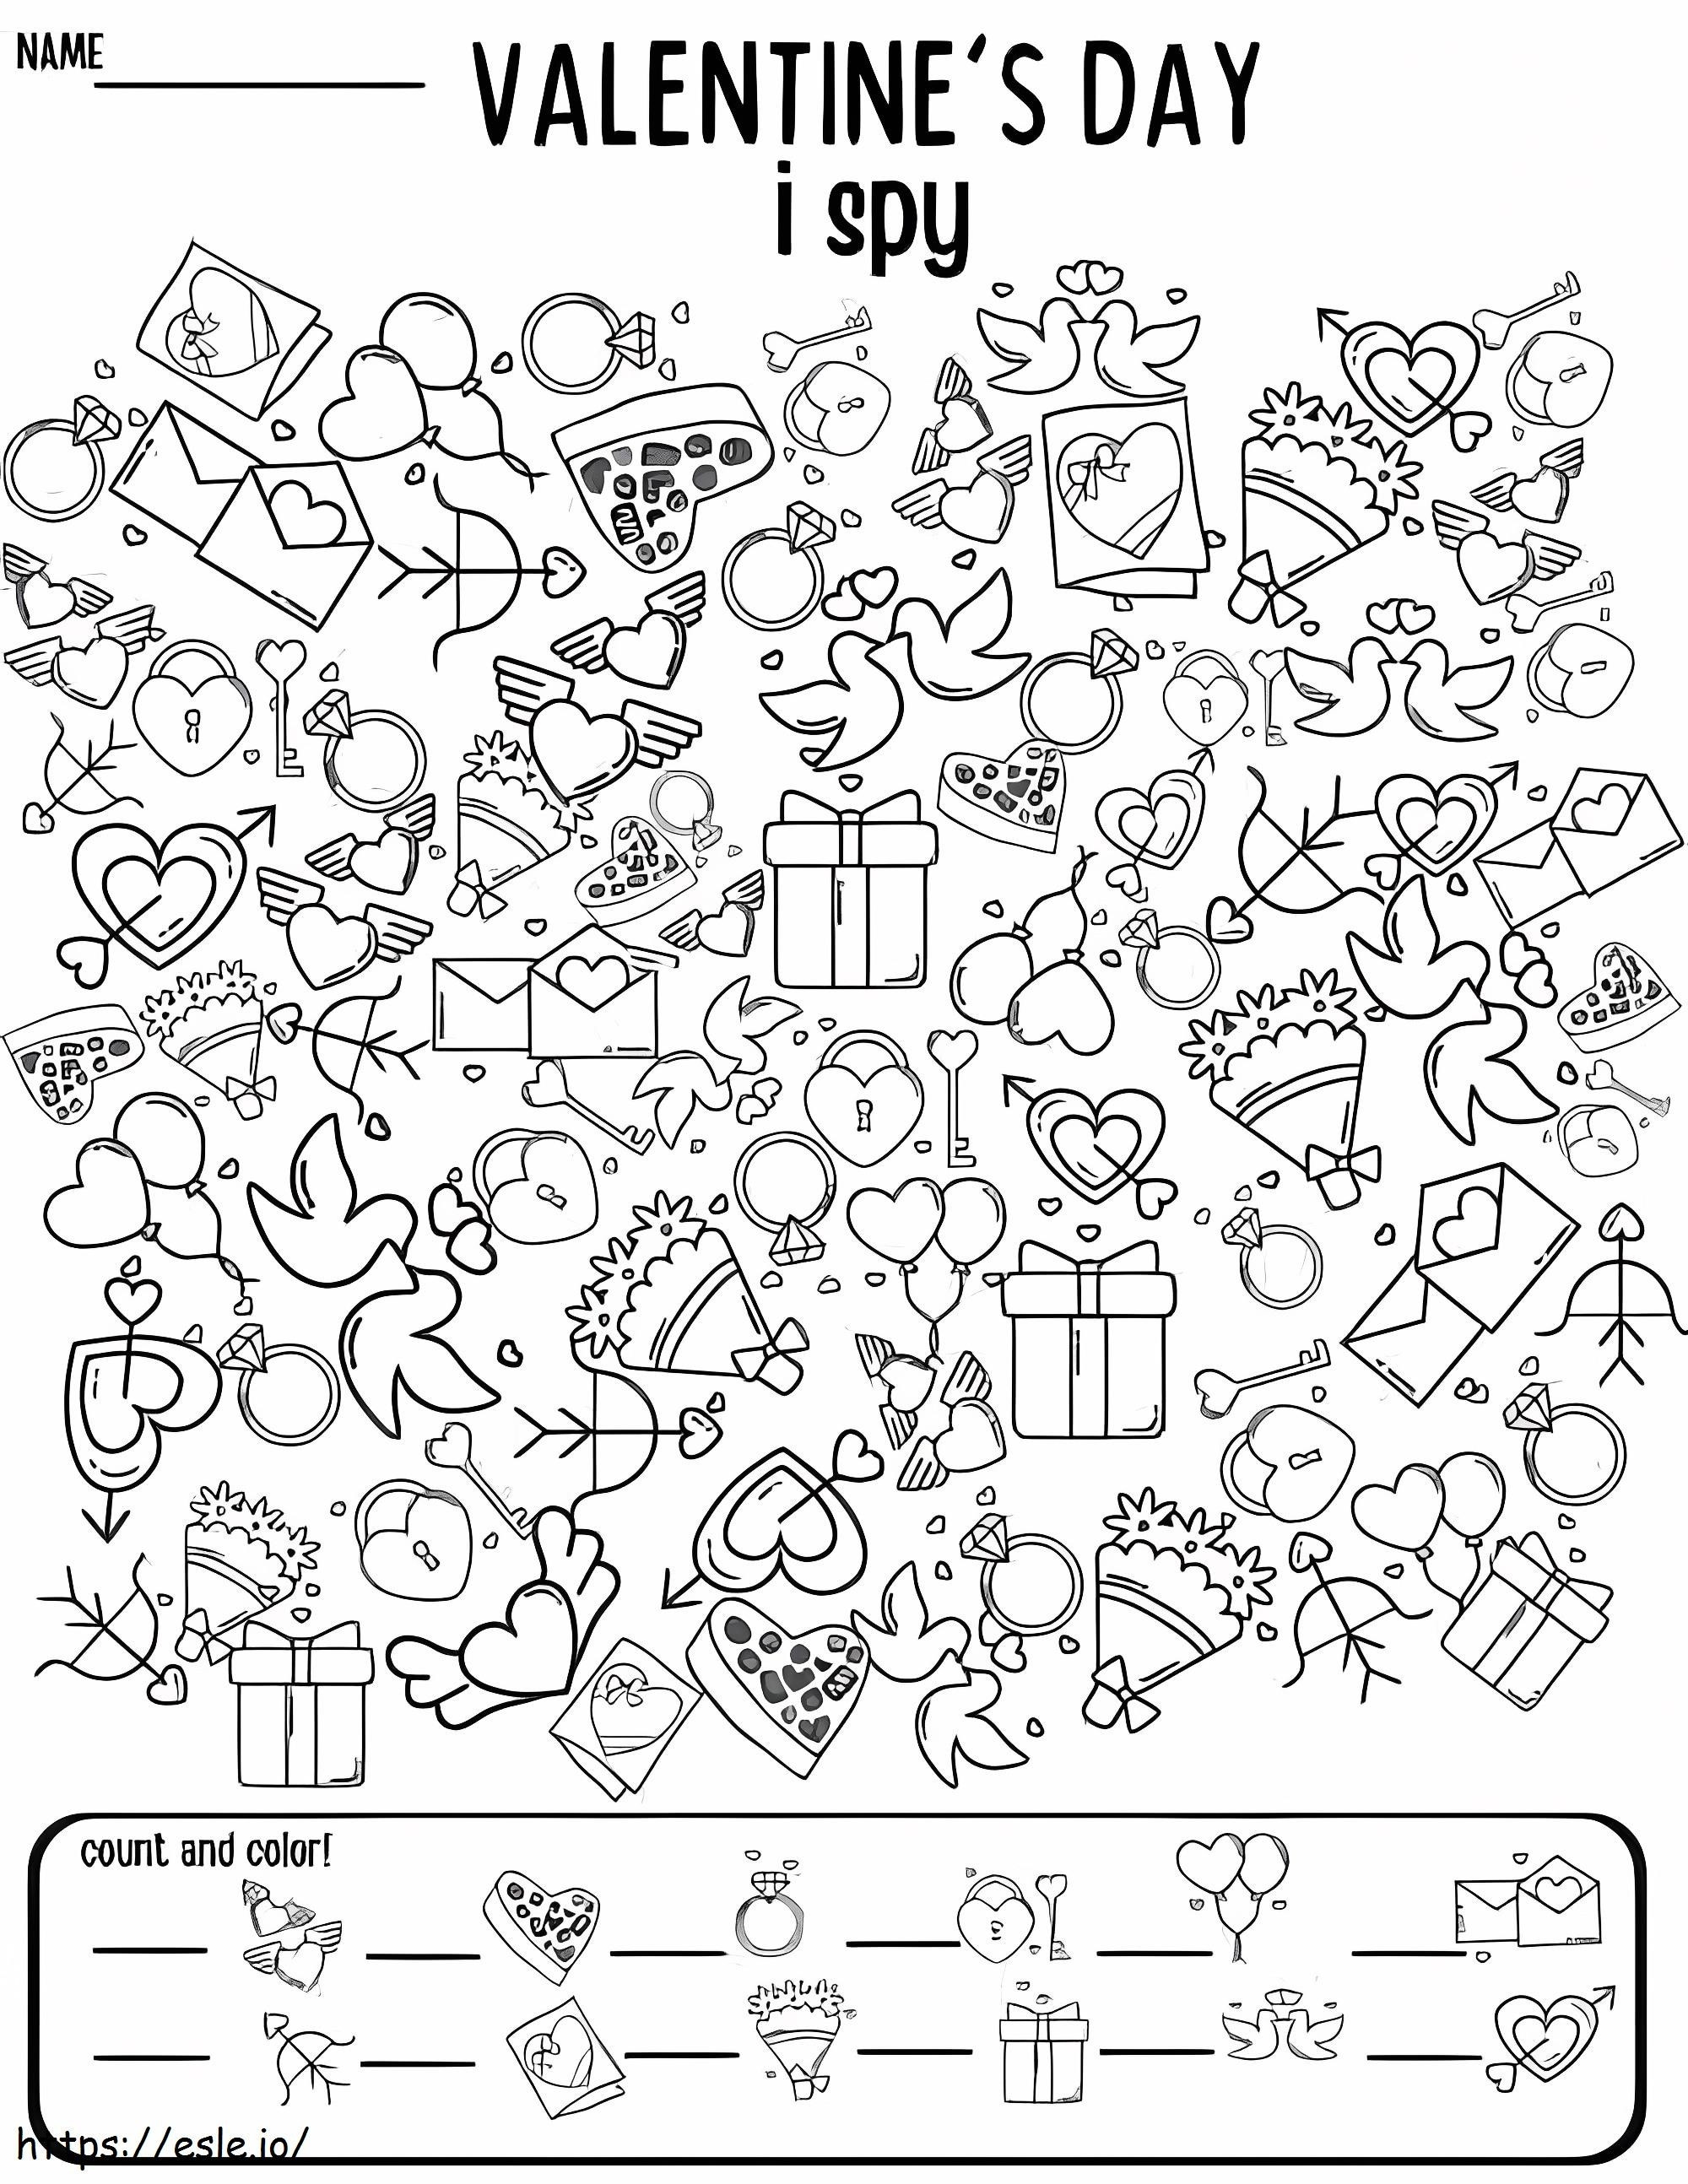 I Spy Valentines Day coloring page